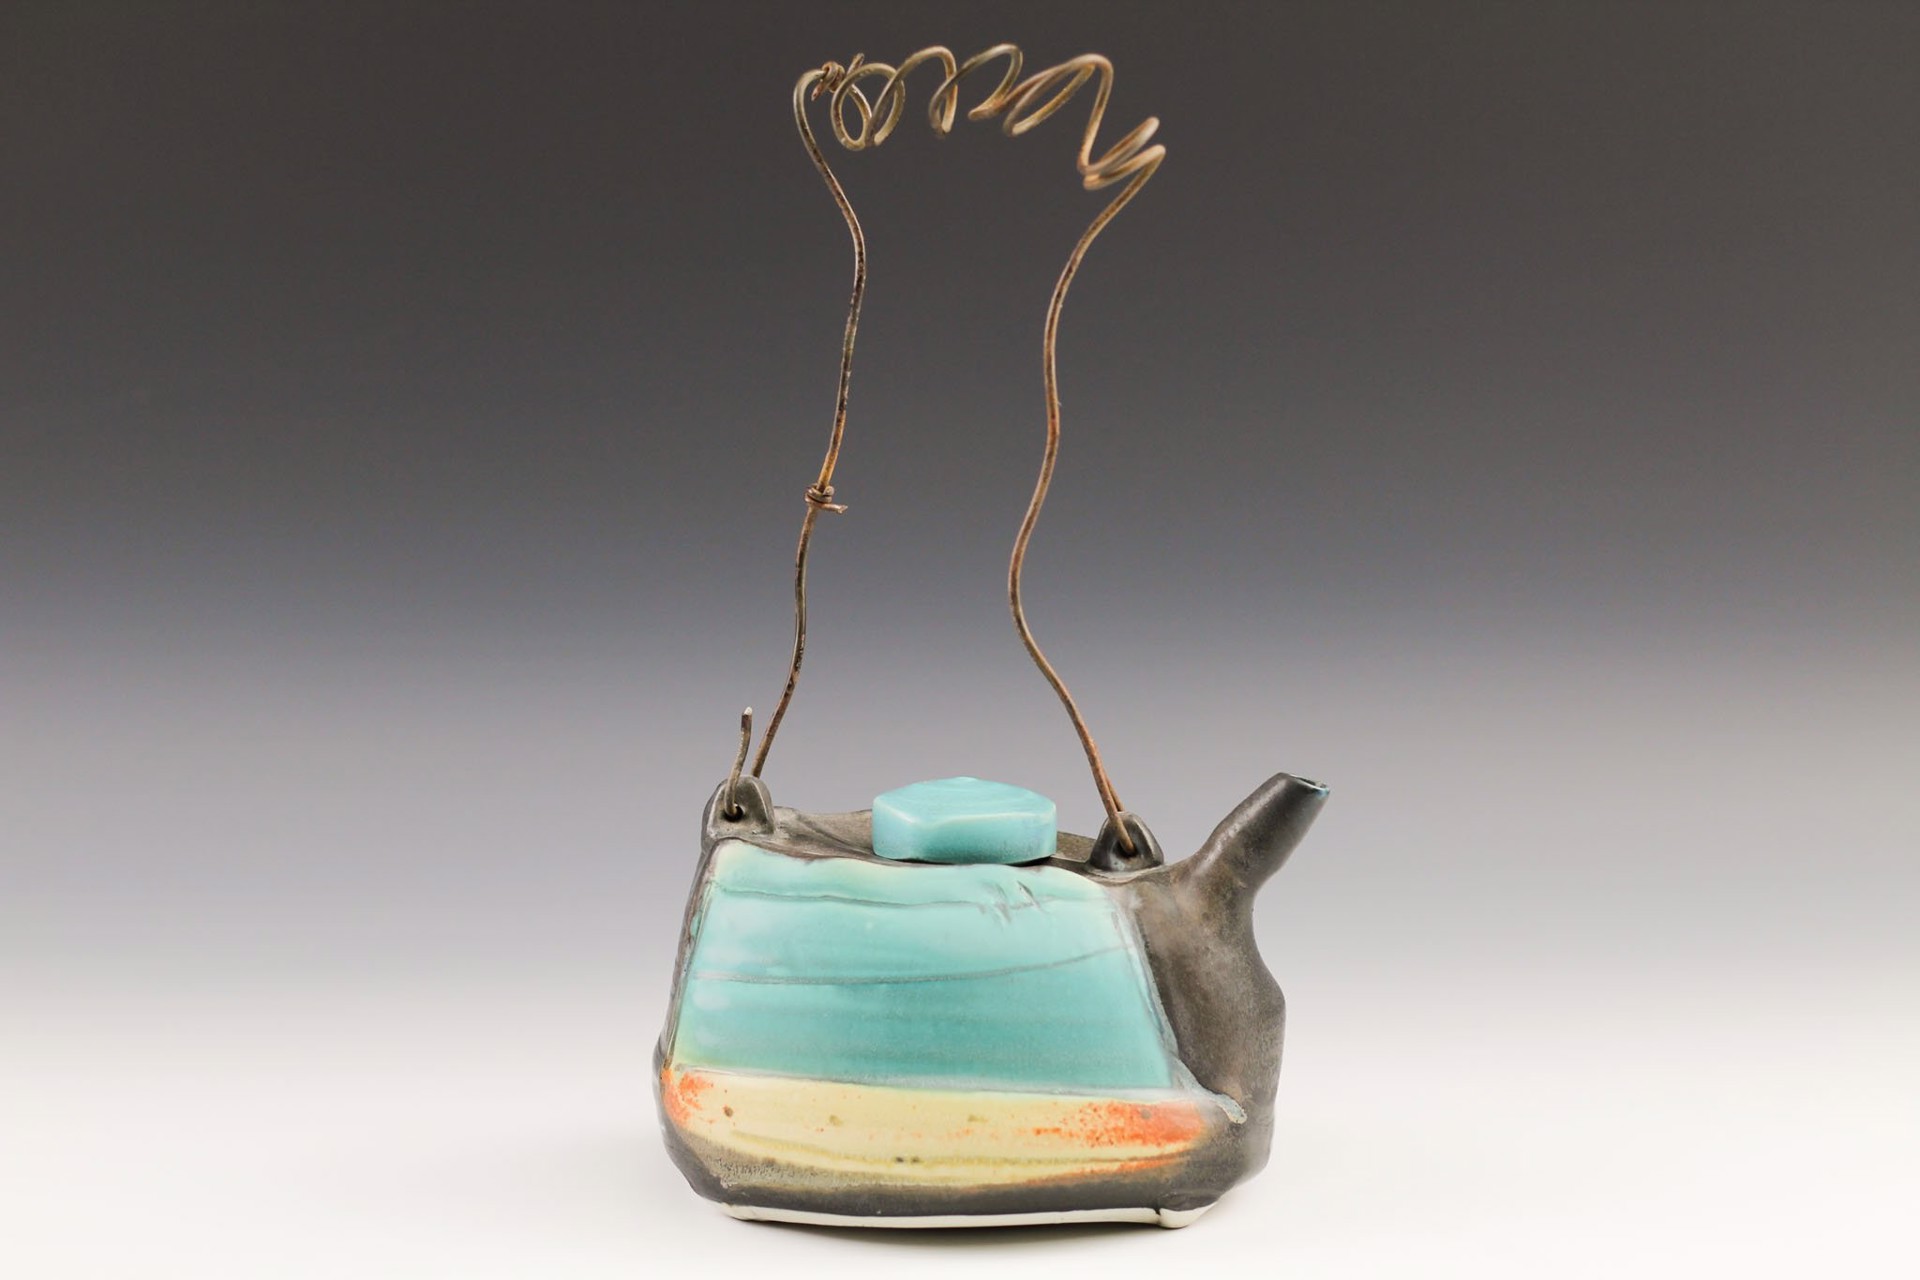 Teapot by Delores Fortuna